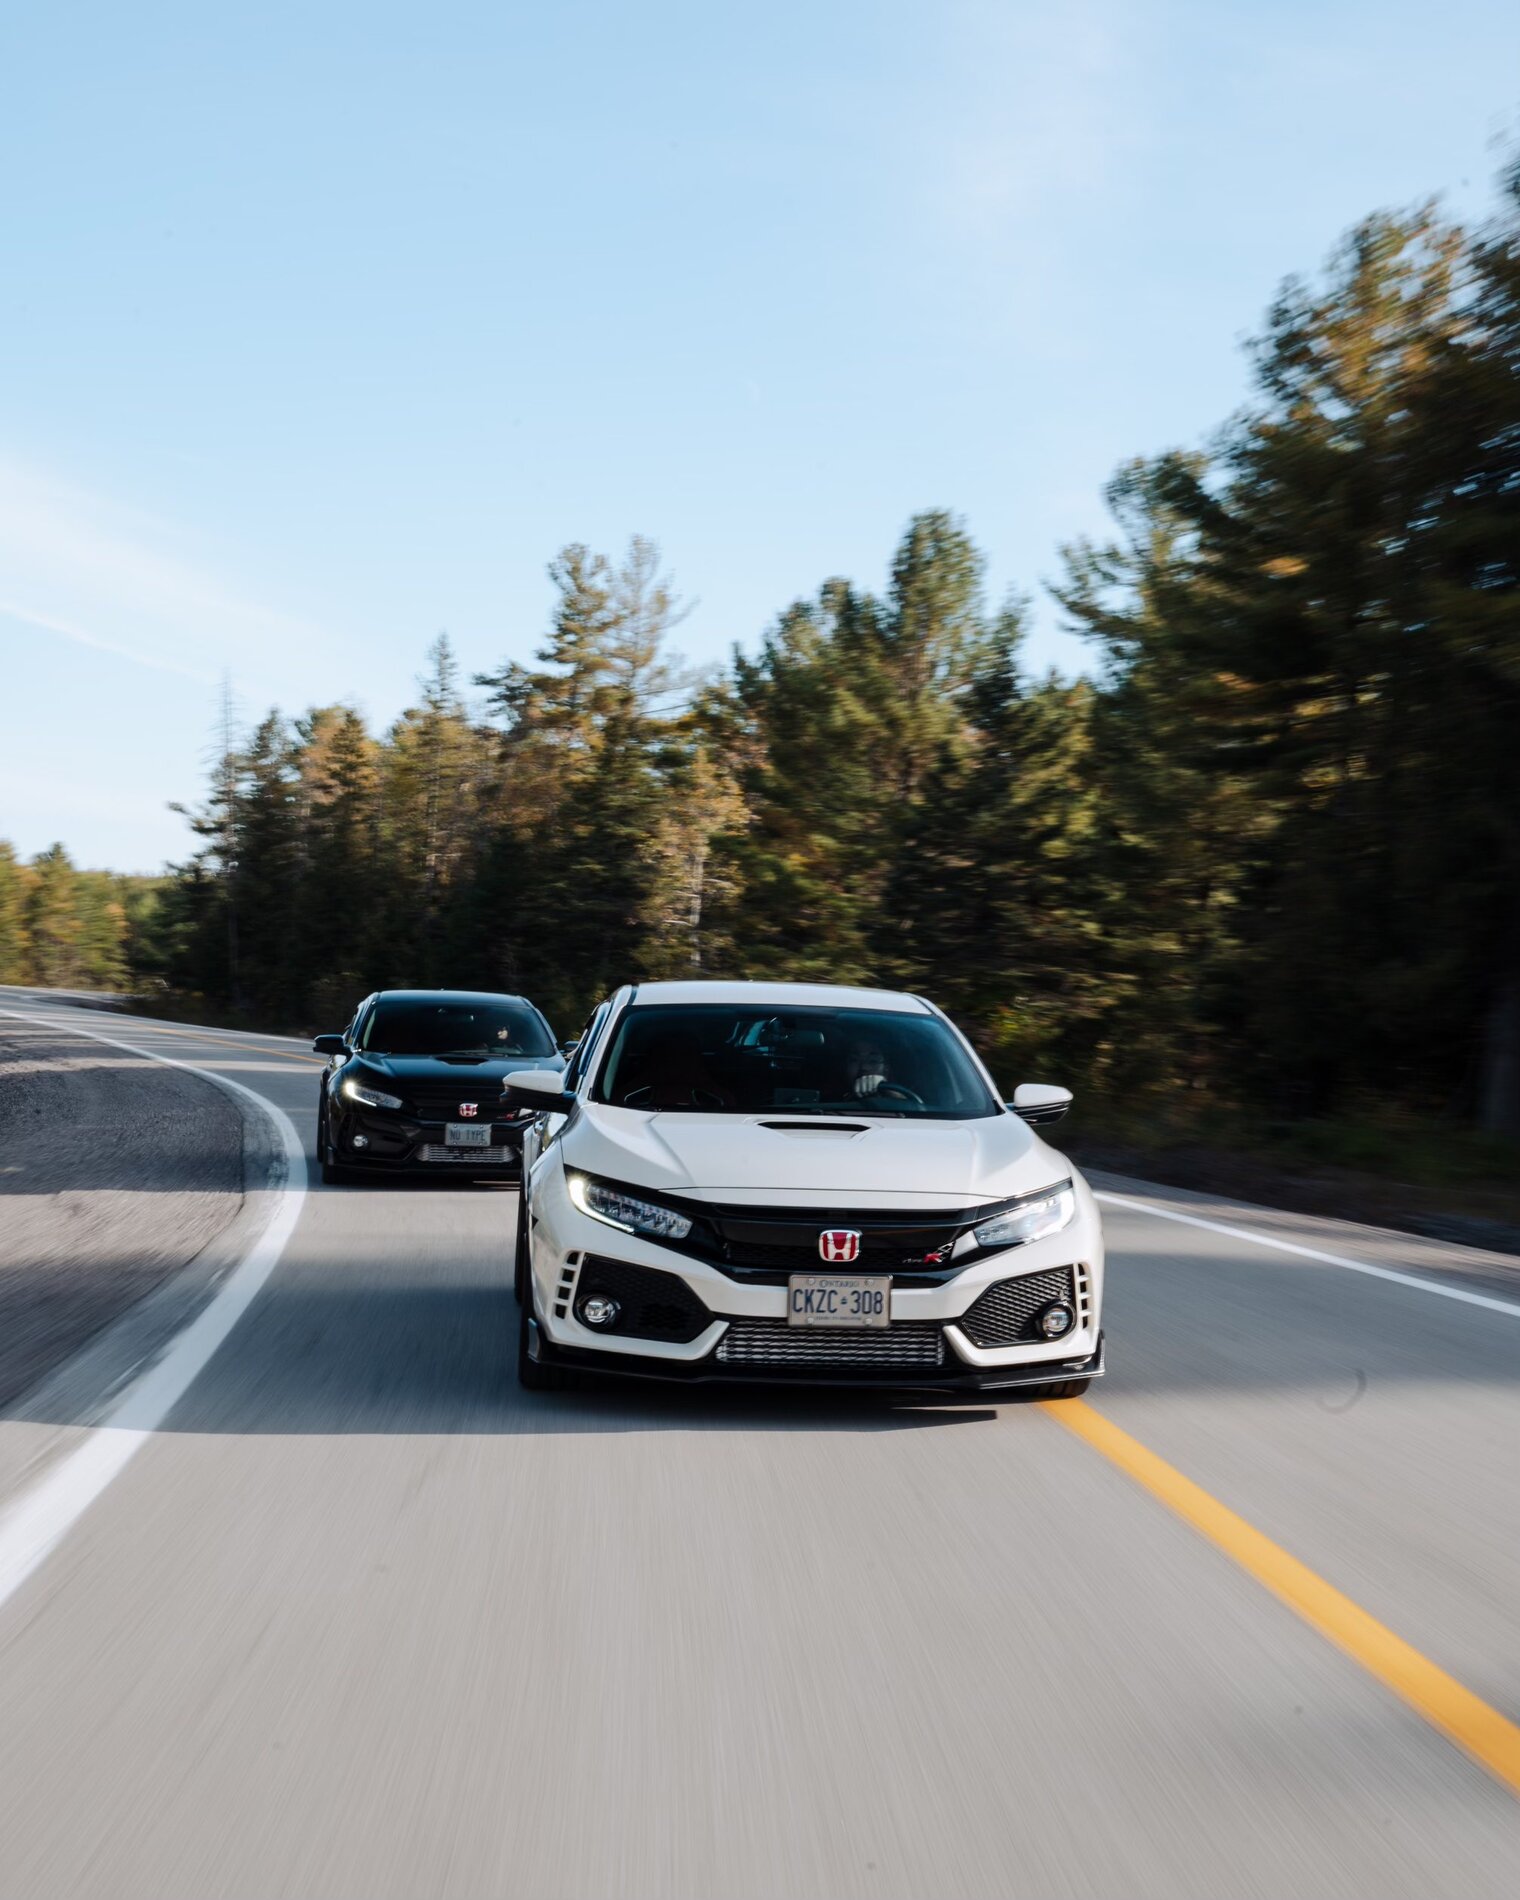 Honda Civic 10th gen What did you do to your Type R today? image1